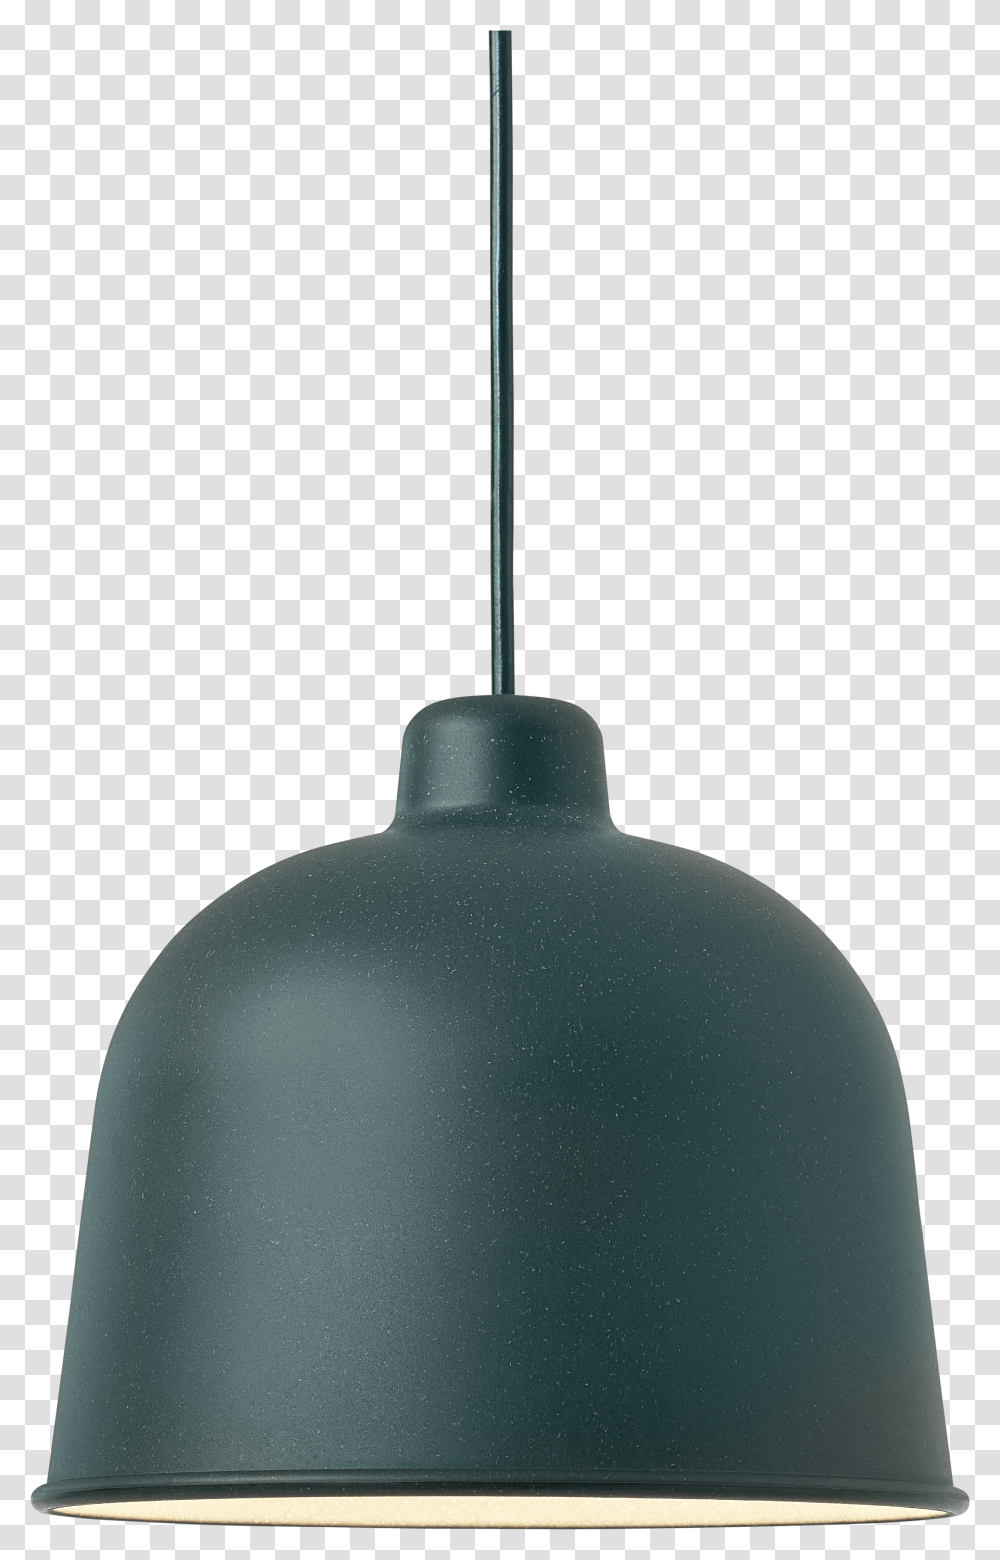 Grain Pendant Lamp A Refreshing Update Of The Classic Hanging Light Bulb Transparent Png